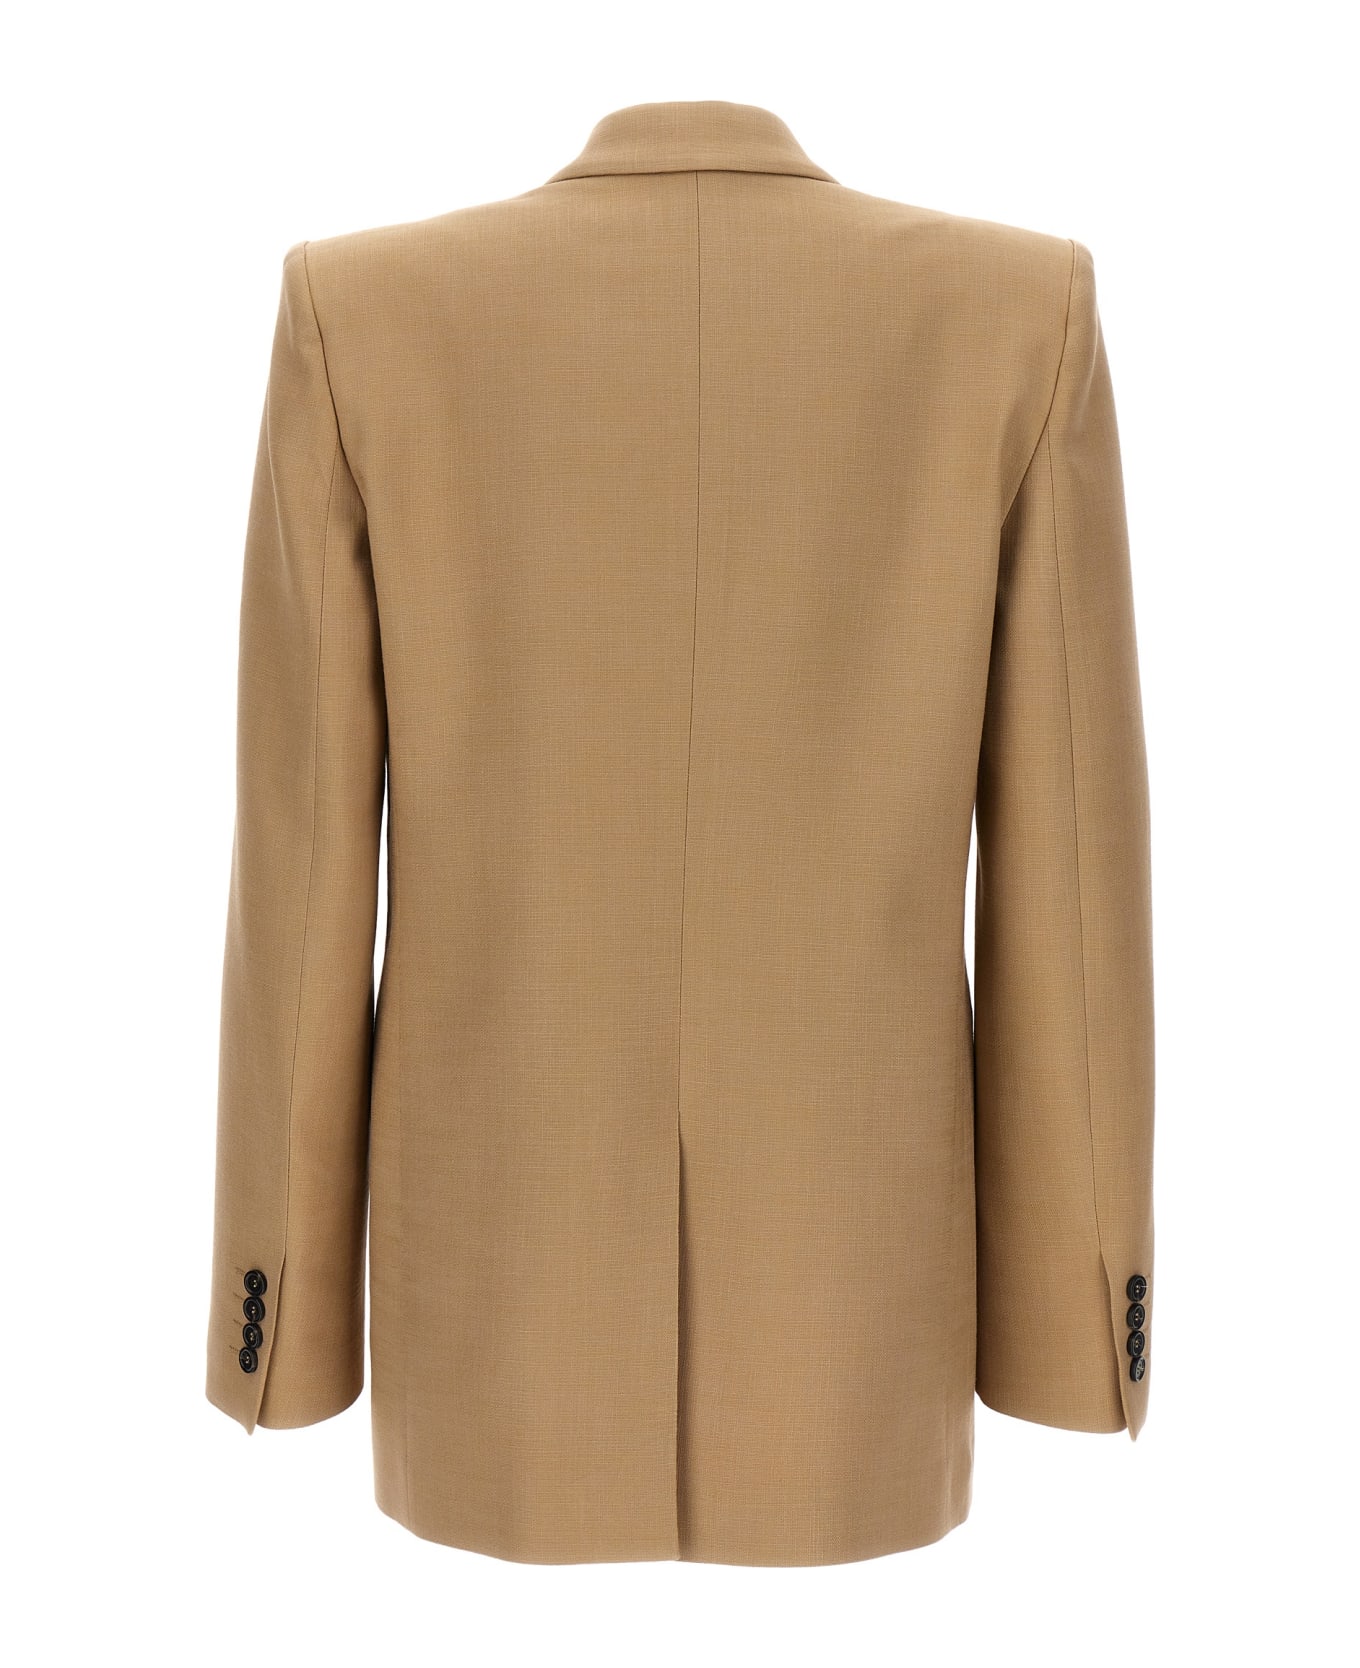 MSGM Double-breasted Blazer - SAND